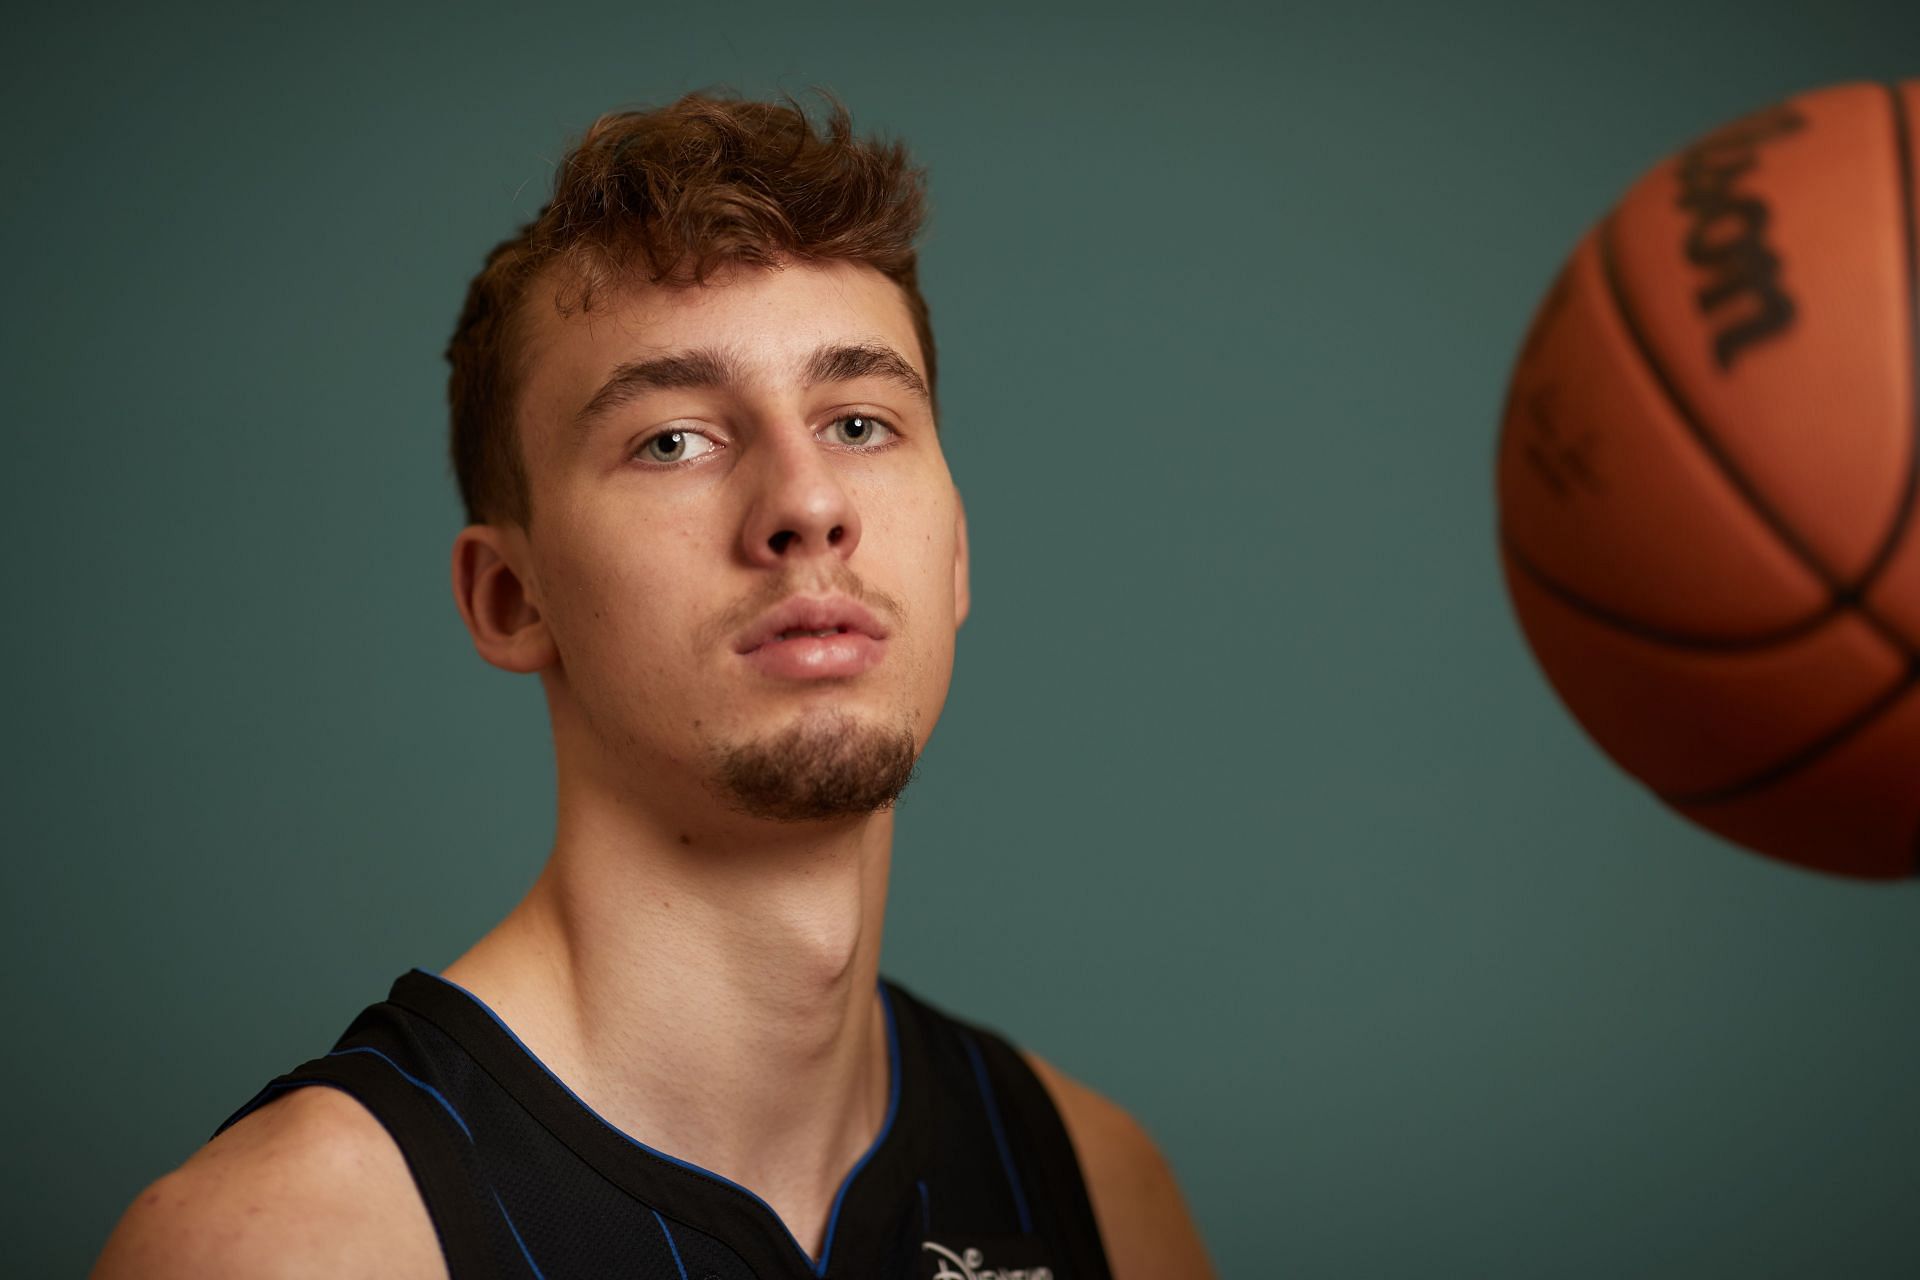 Franz Wagner #21 of the Orlando Magic poses for a photo during the 2021 NBA Rookie Photo Shoot on August 15, 2021 in Las Vegas, Nevada.